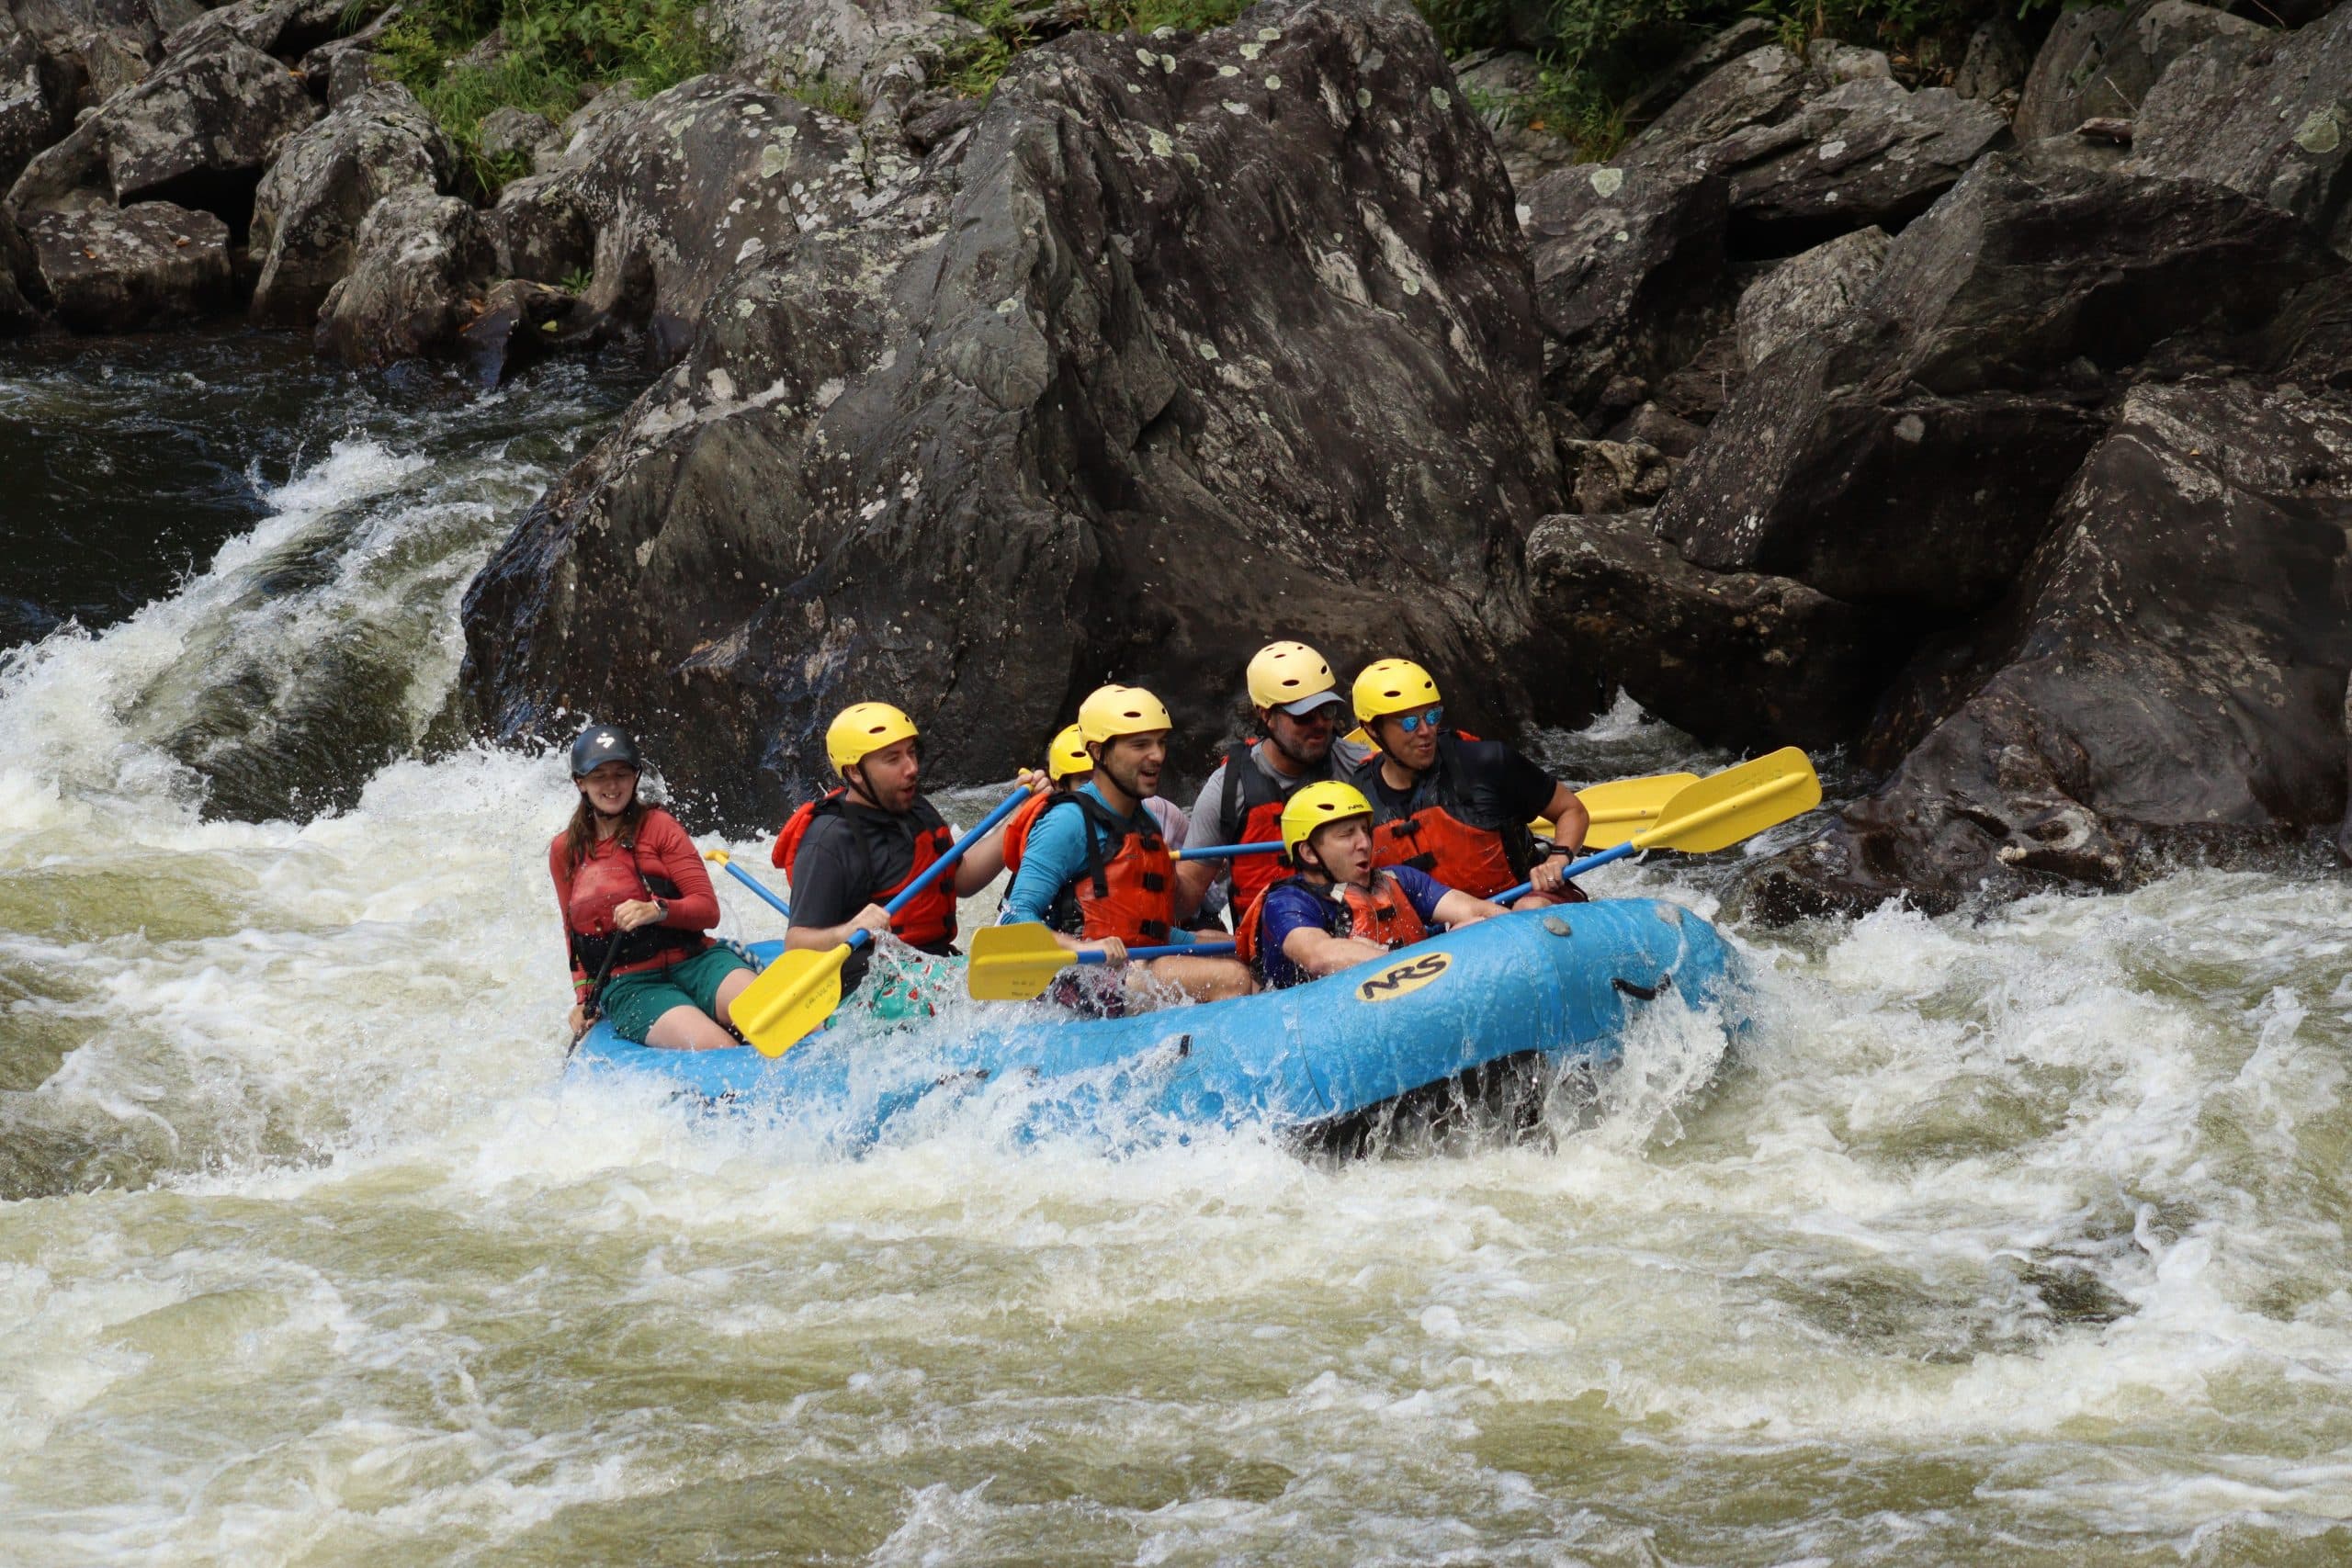 10. Cruise Down the Deerfield River with Zoar's Rafting Adventures for Over 30 Years